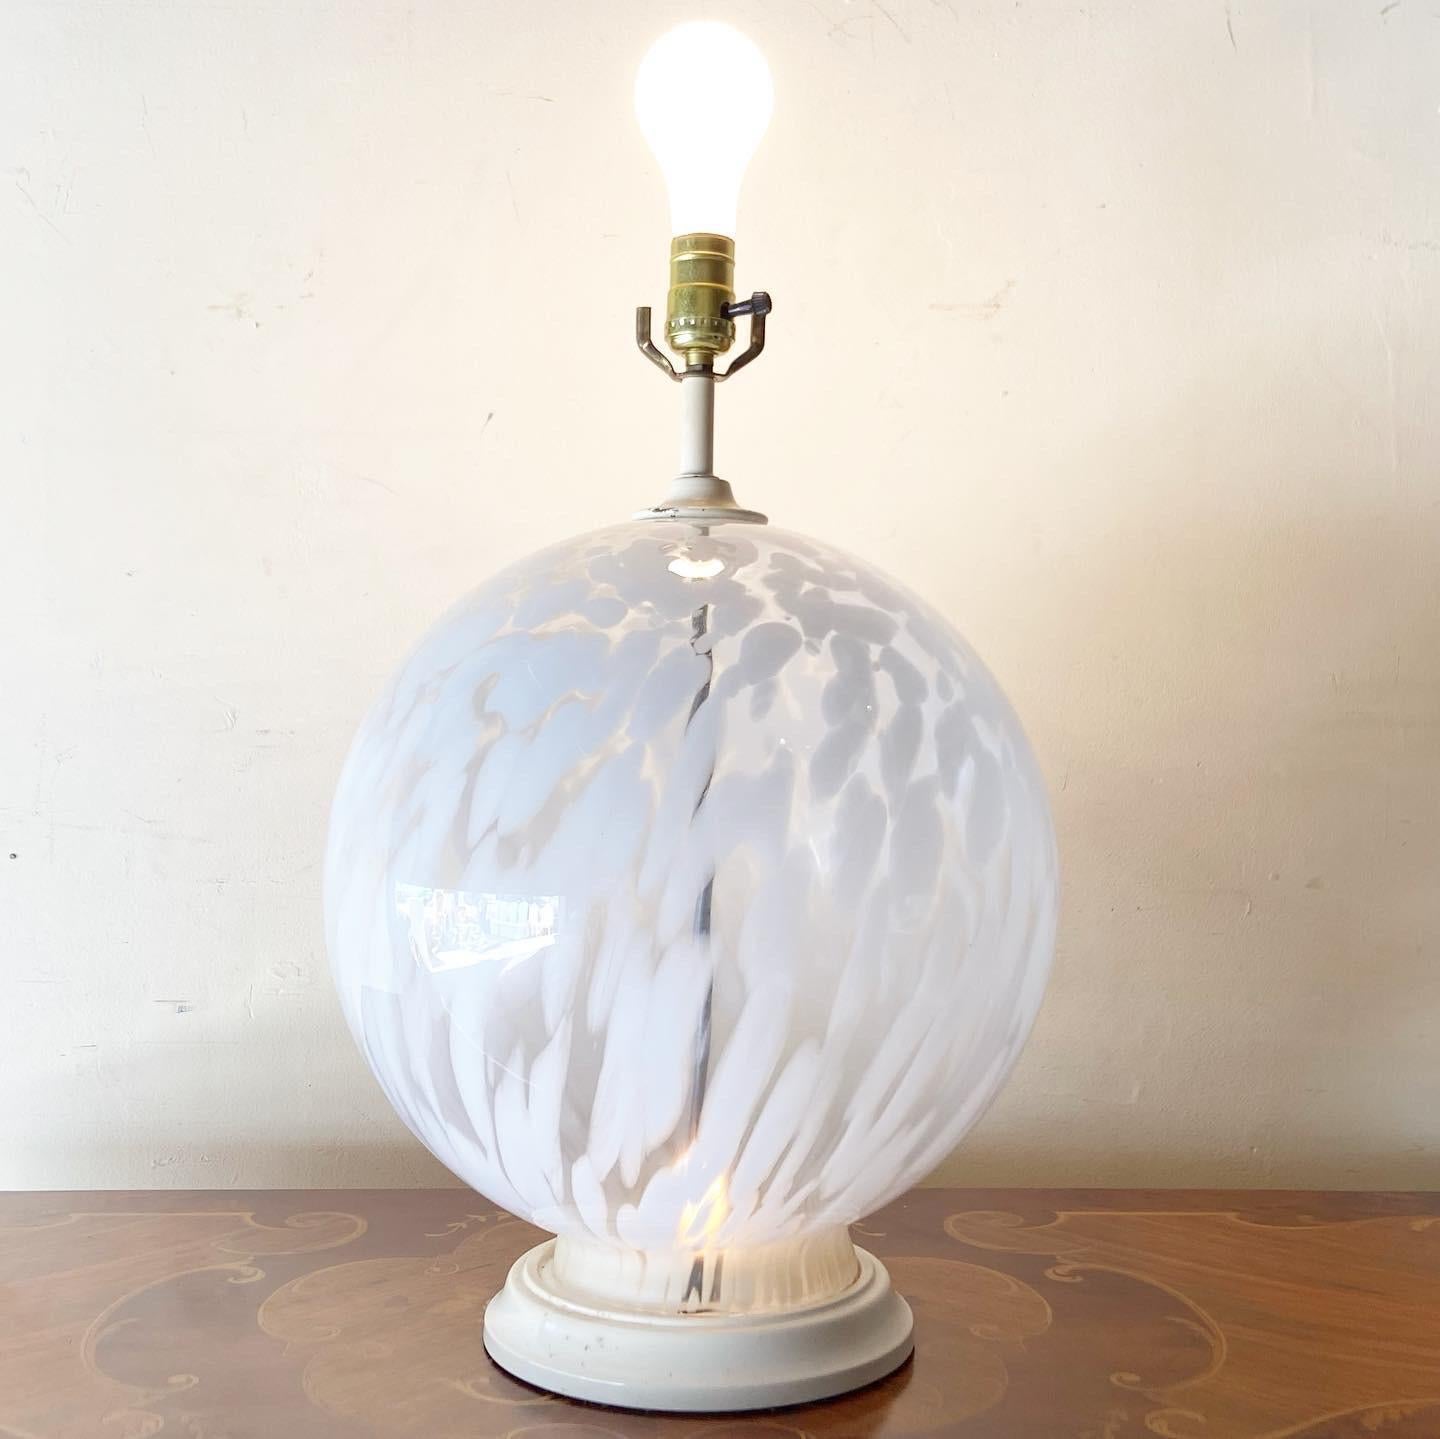 Exceptional postmodern Italian Murano glass table lamp. Features a large spherical white and transparent body.

4 settings: both lights, top light, bottom light, off
